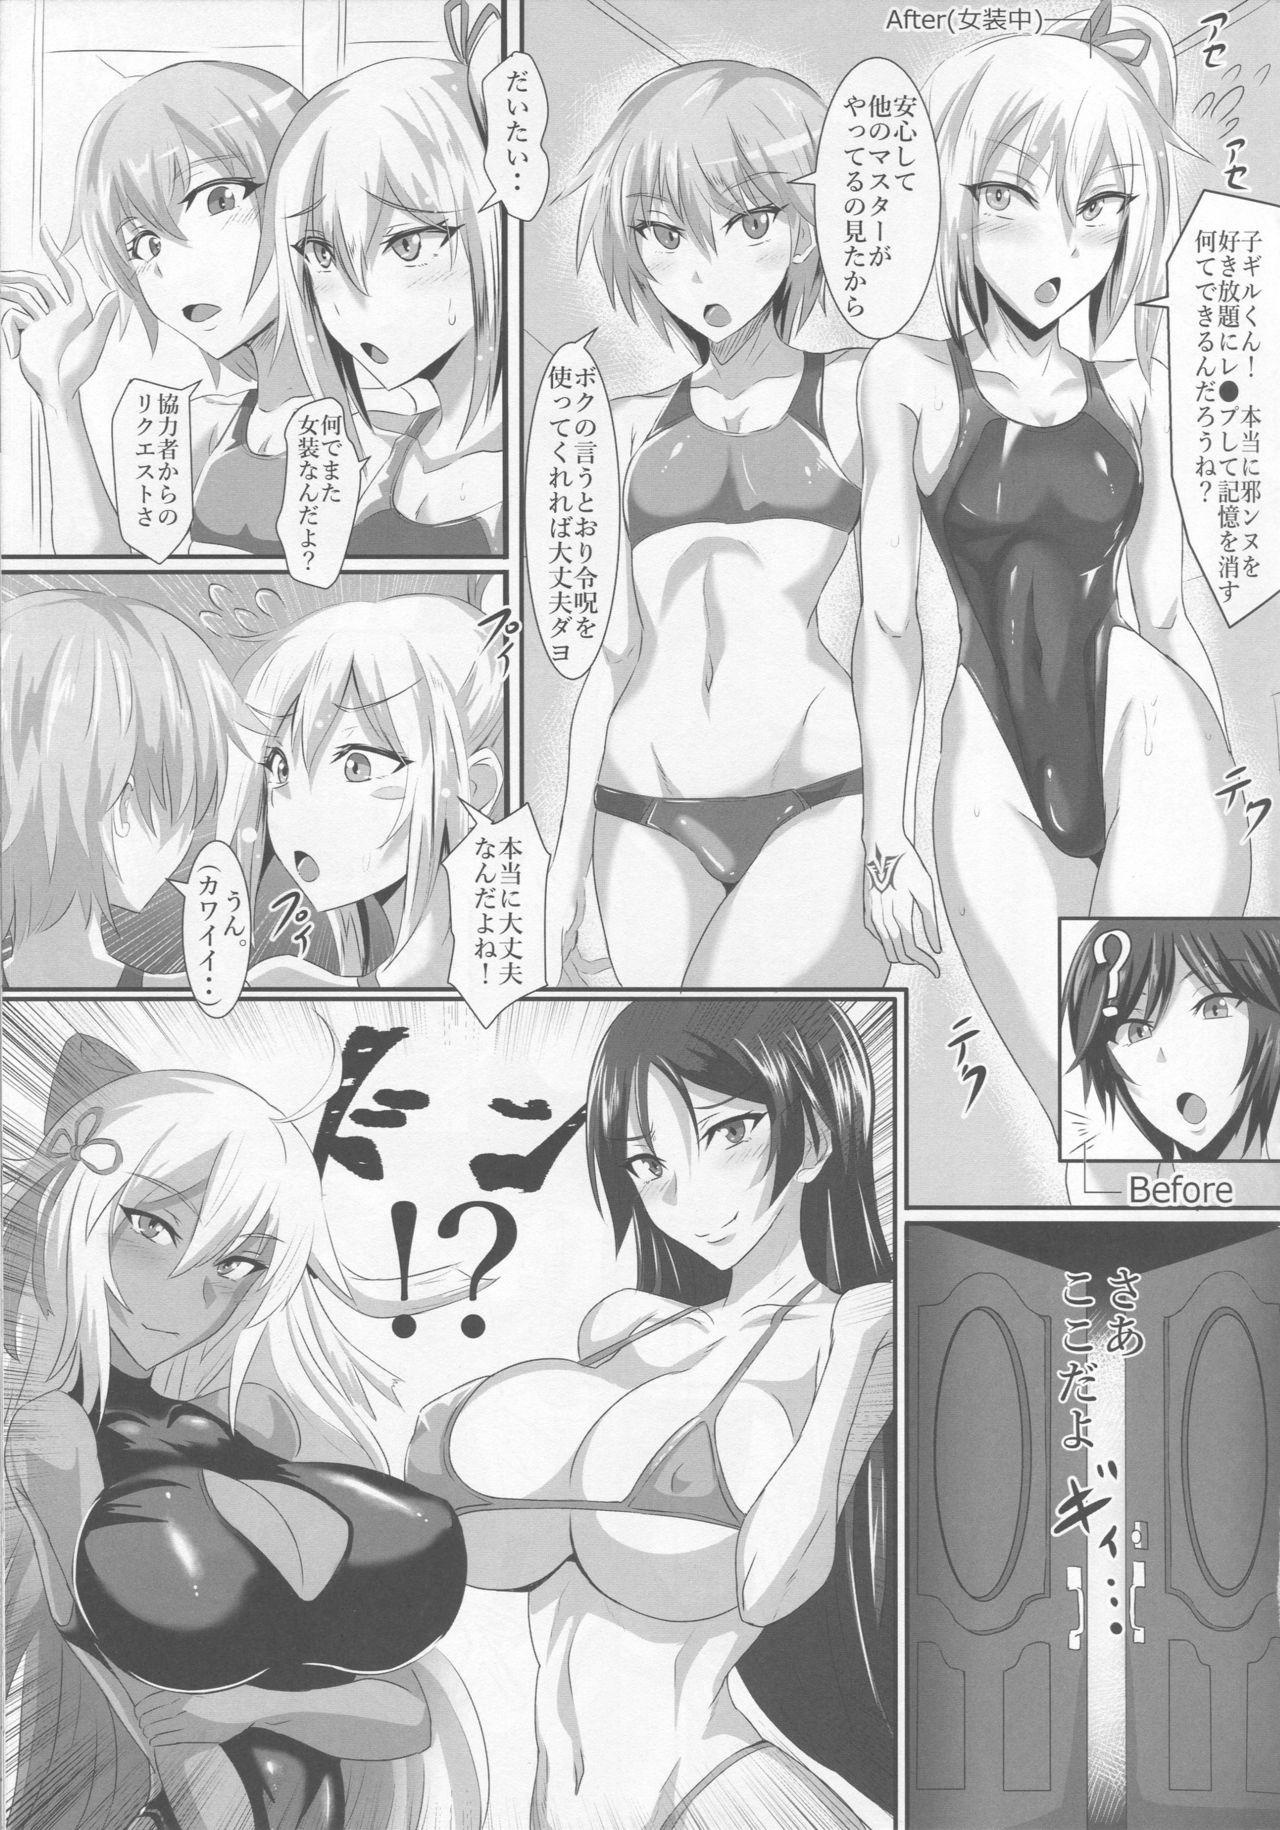 Gay Party Gehenna 9 - Fate grand order Hardcoresex - Page 6